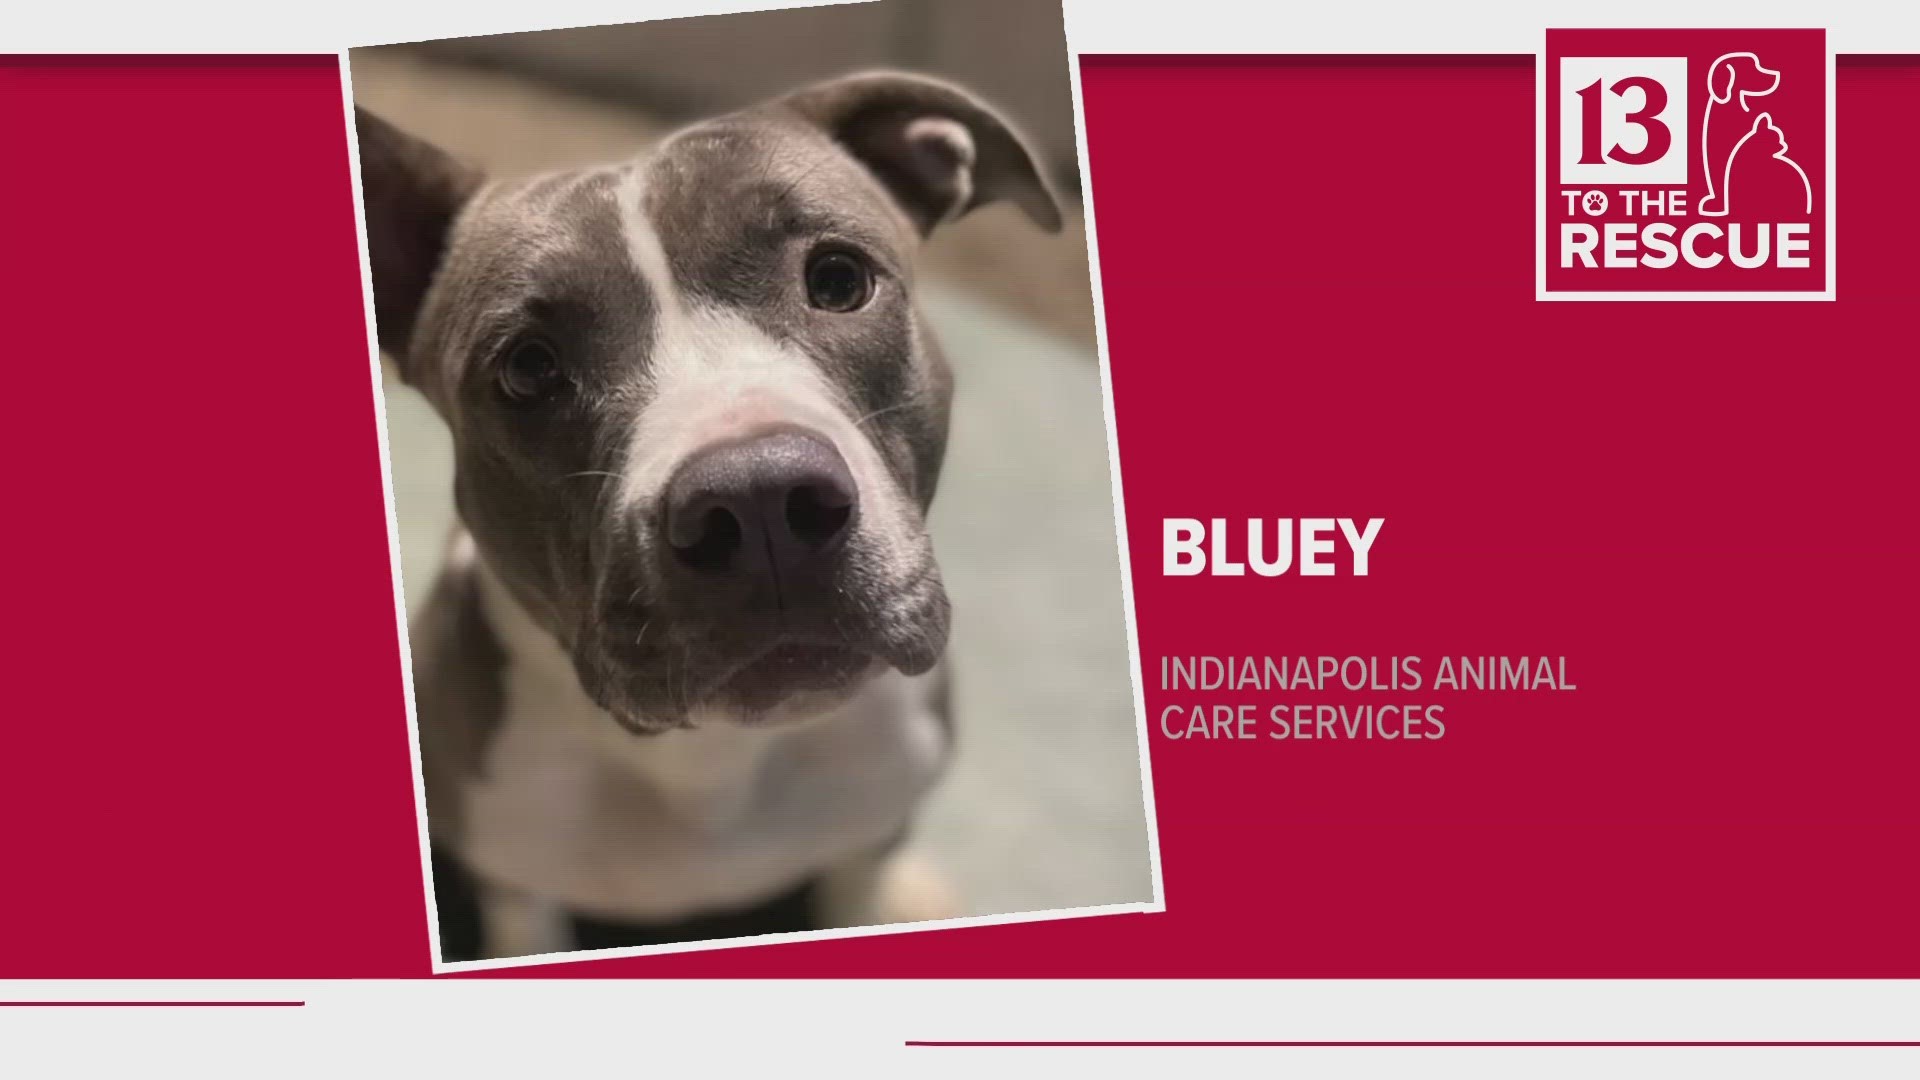 Our 13 to the Rescue pets of the week come from Indianapolis Animal Care Services.